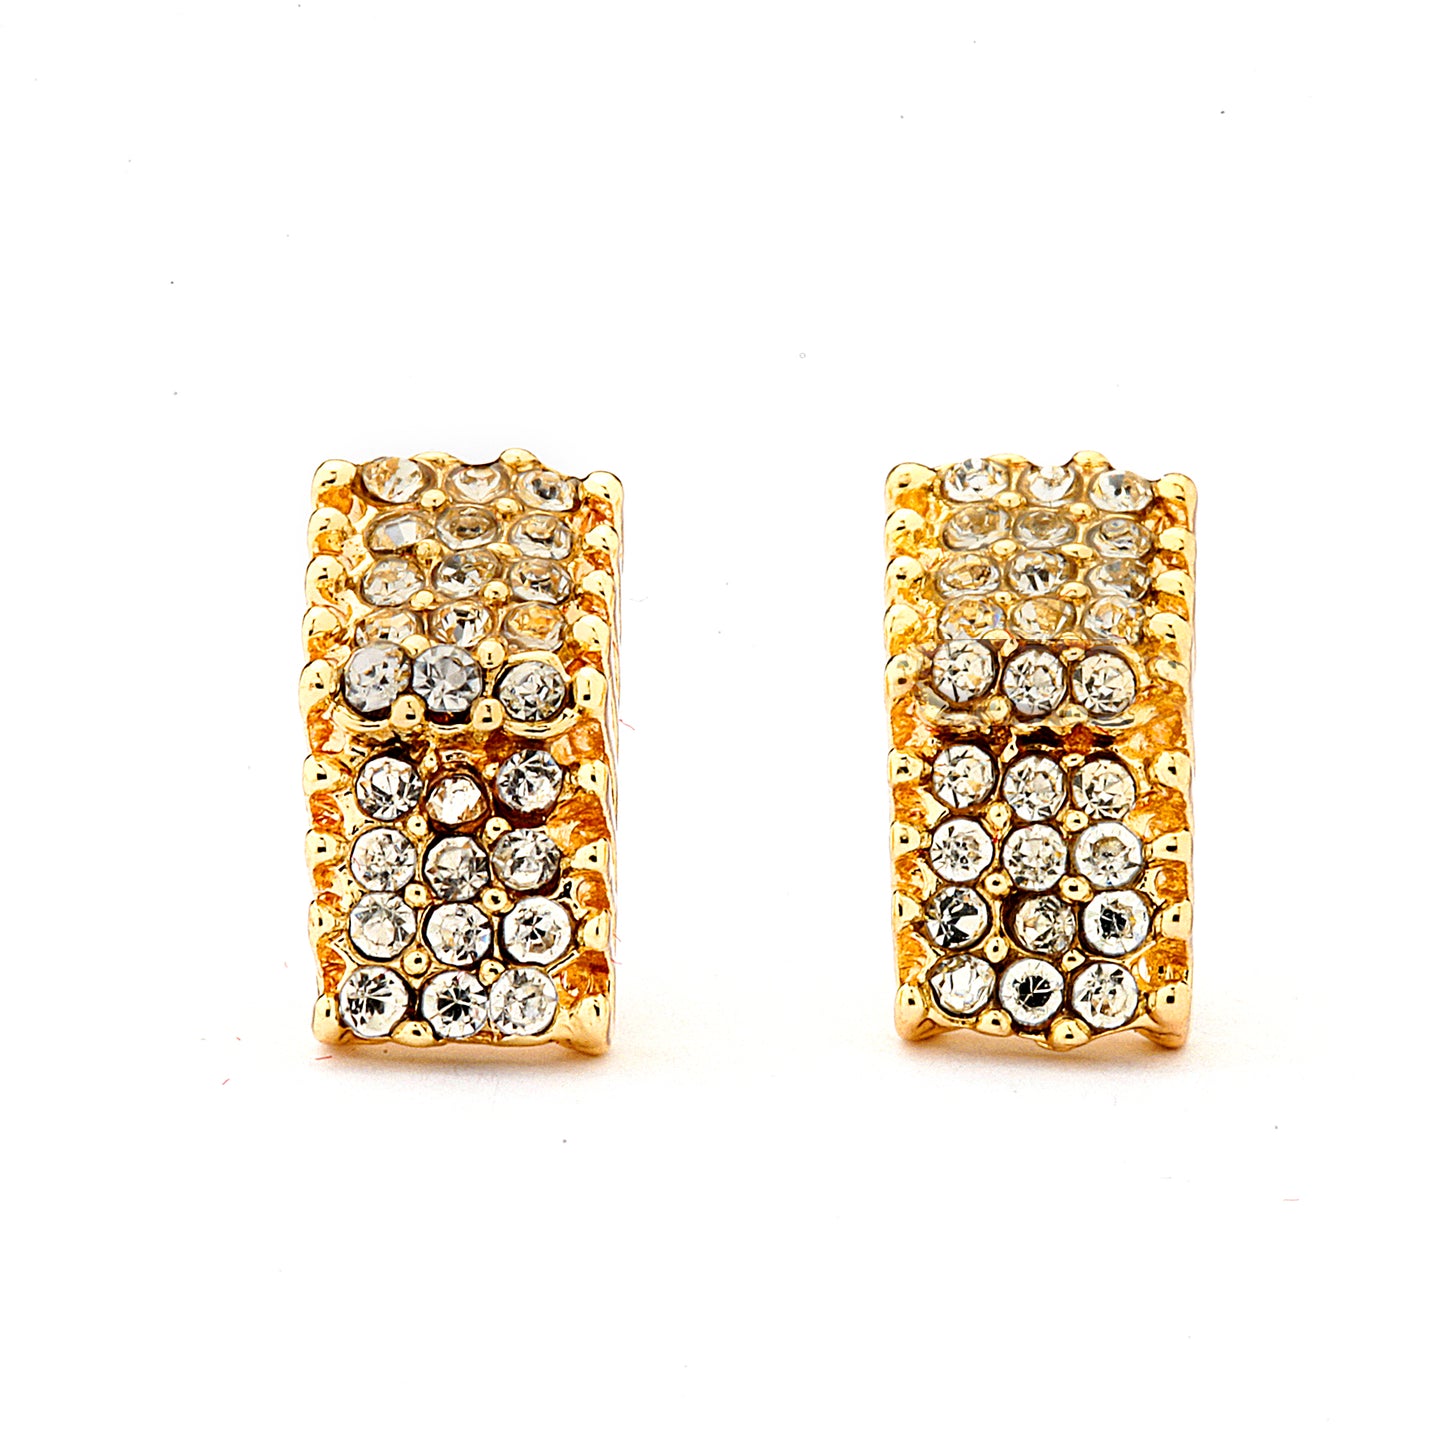 Pave CZ Rectangle Earrings - 14K Gold Filled